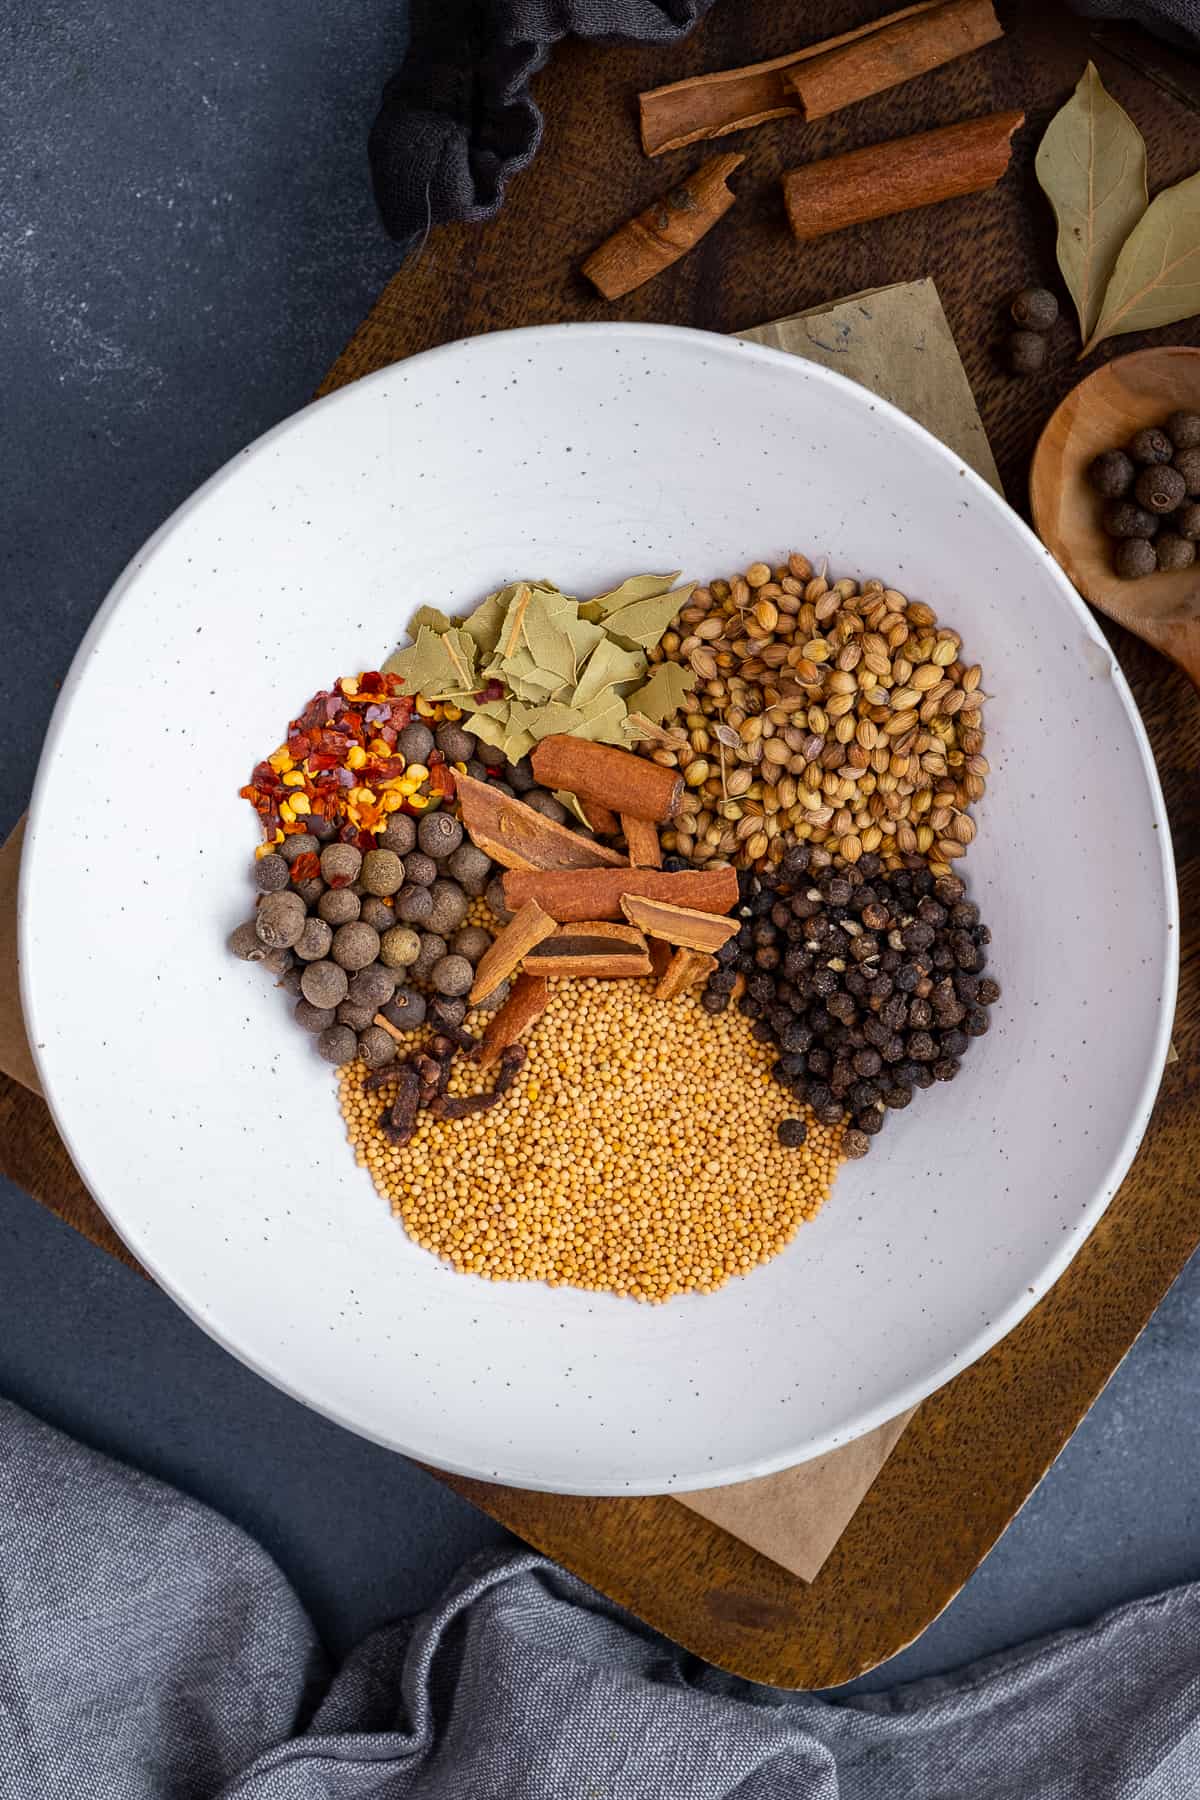 Mustard seeds, allspice berries, coriander seeds, bay leaves, cinnamon sticks and red pepper flakes in a white bowl.